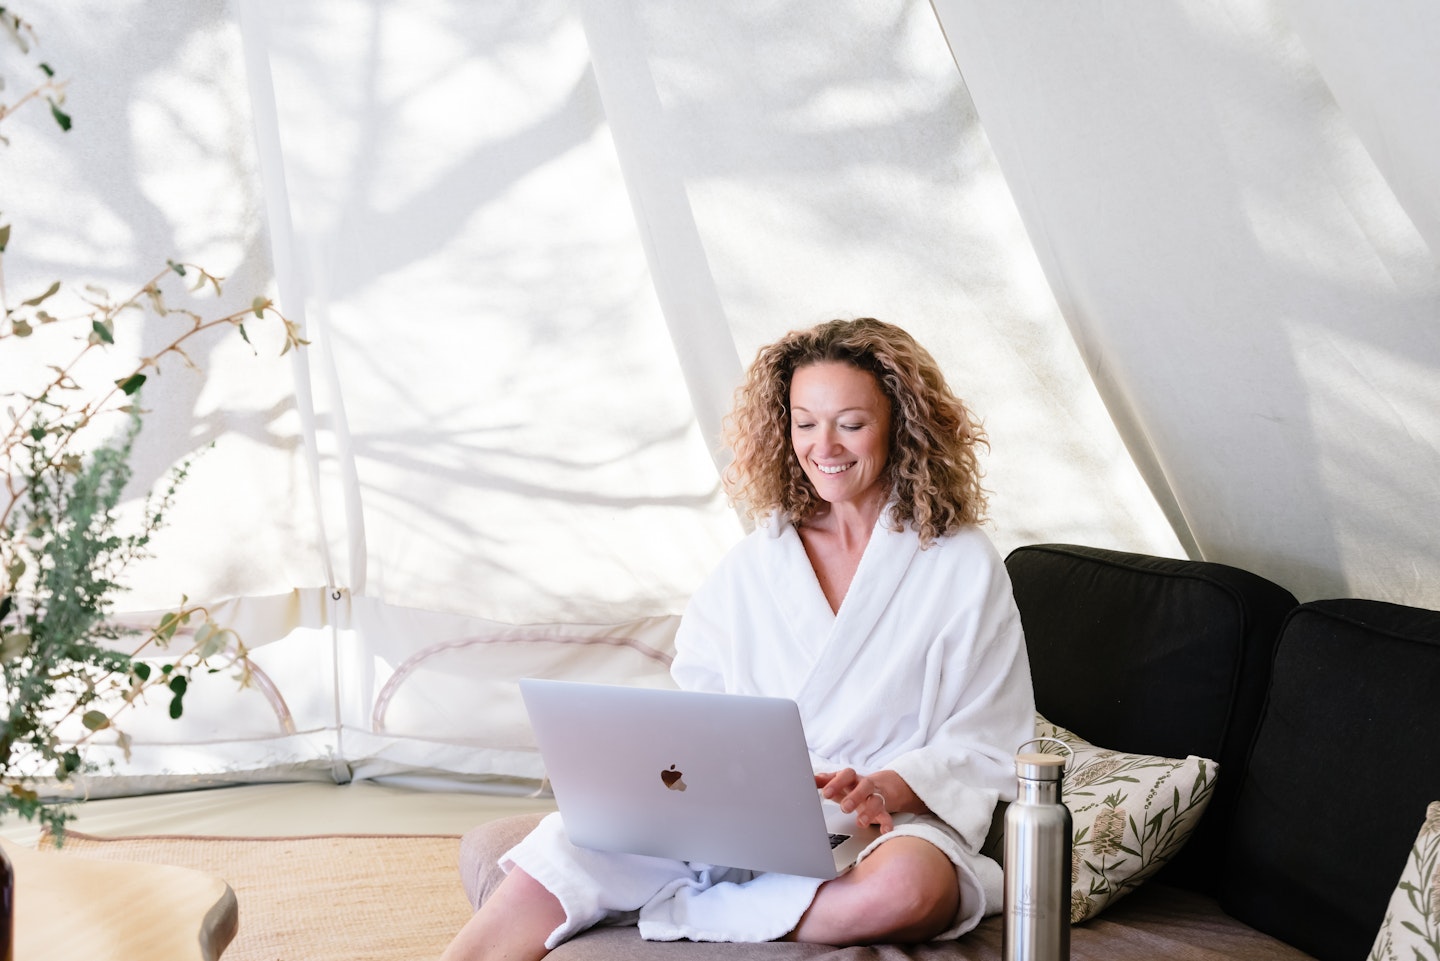 lady working on laptop in relaxation cabana